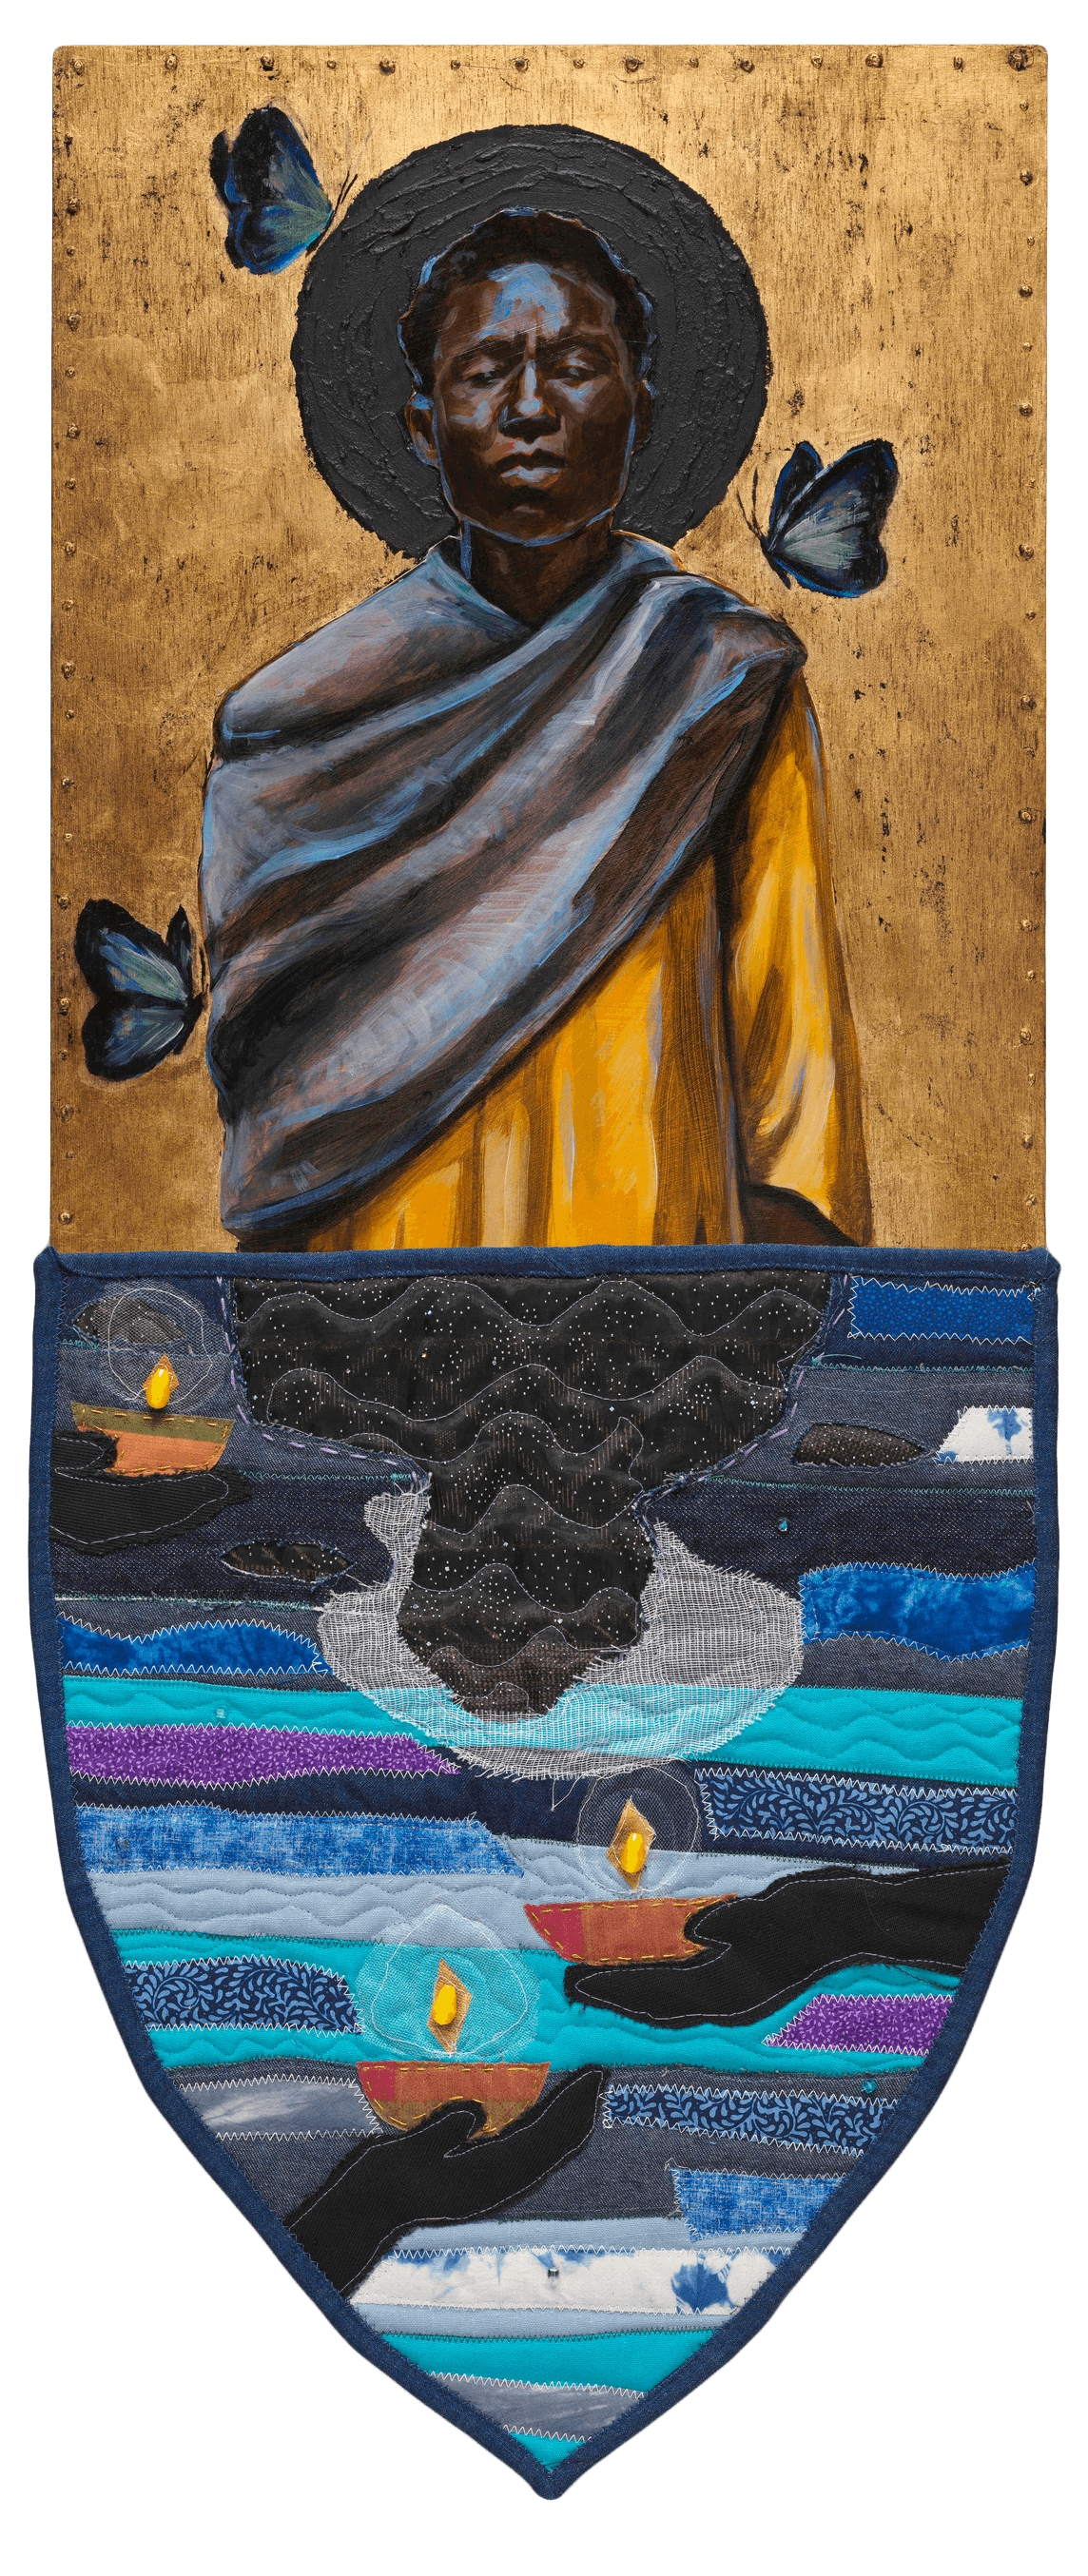 A mixed media piece of art by Stephen Towns that has a painting of a black man facing forward with his eye's closed above his reflected in the water.